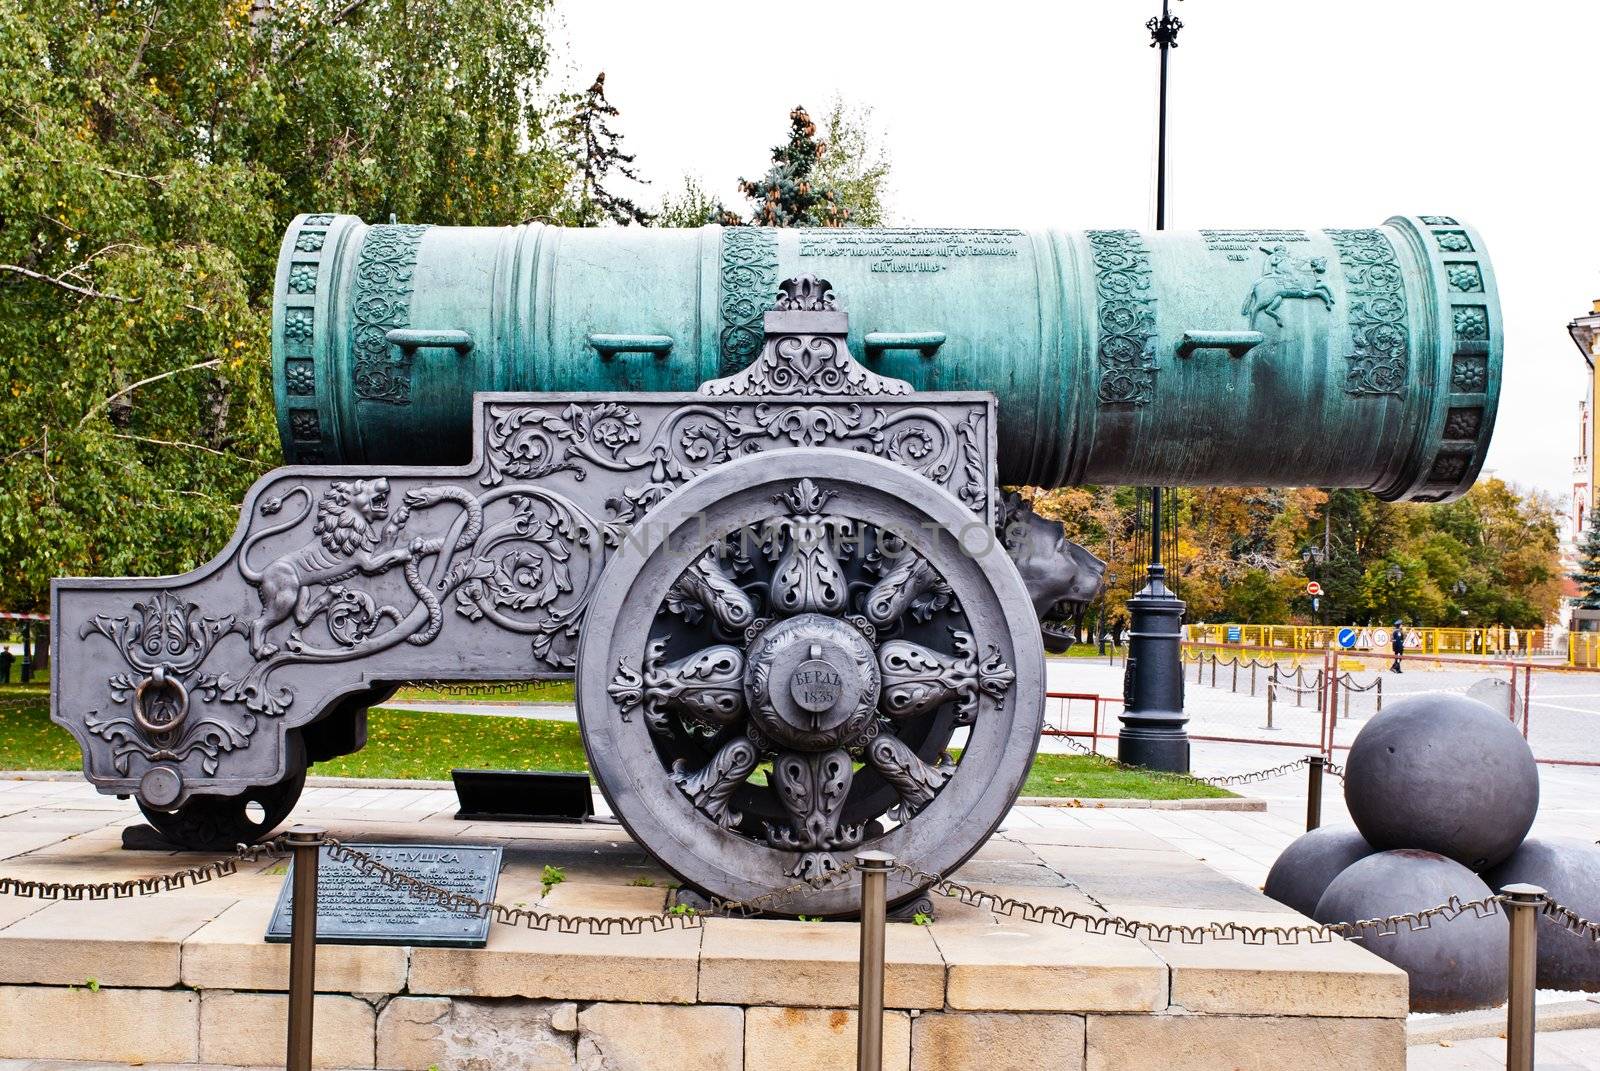 Full shot of russian tsar cannon taken during winter season on a cloudy day
